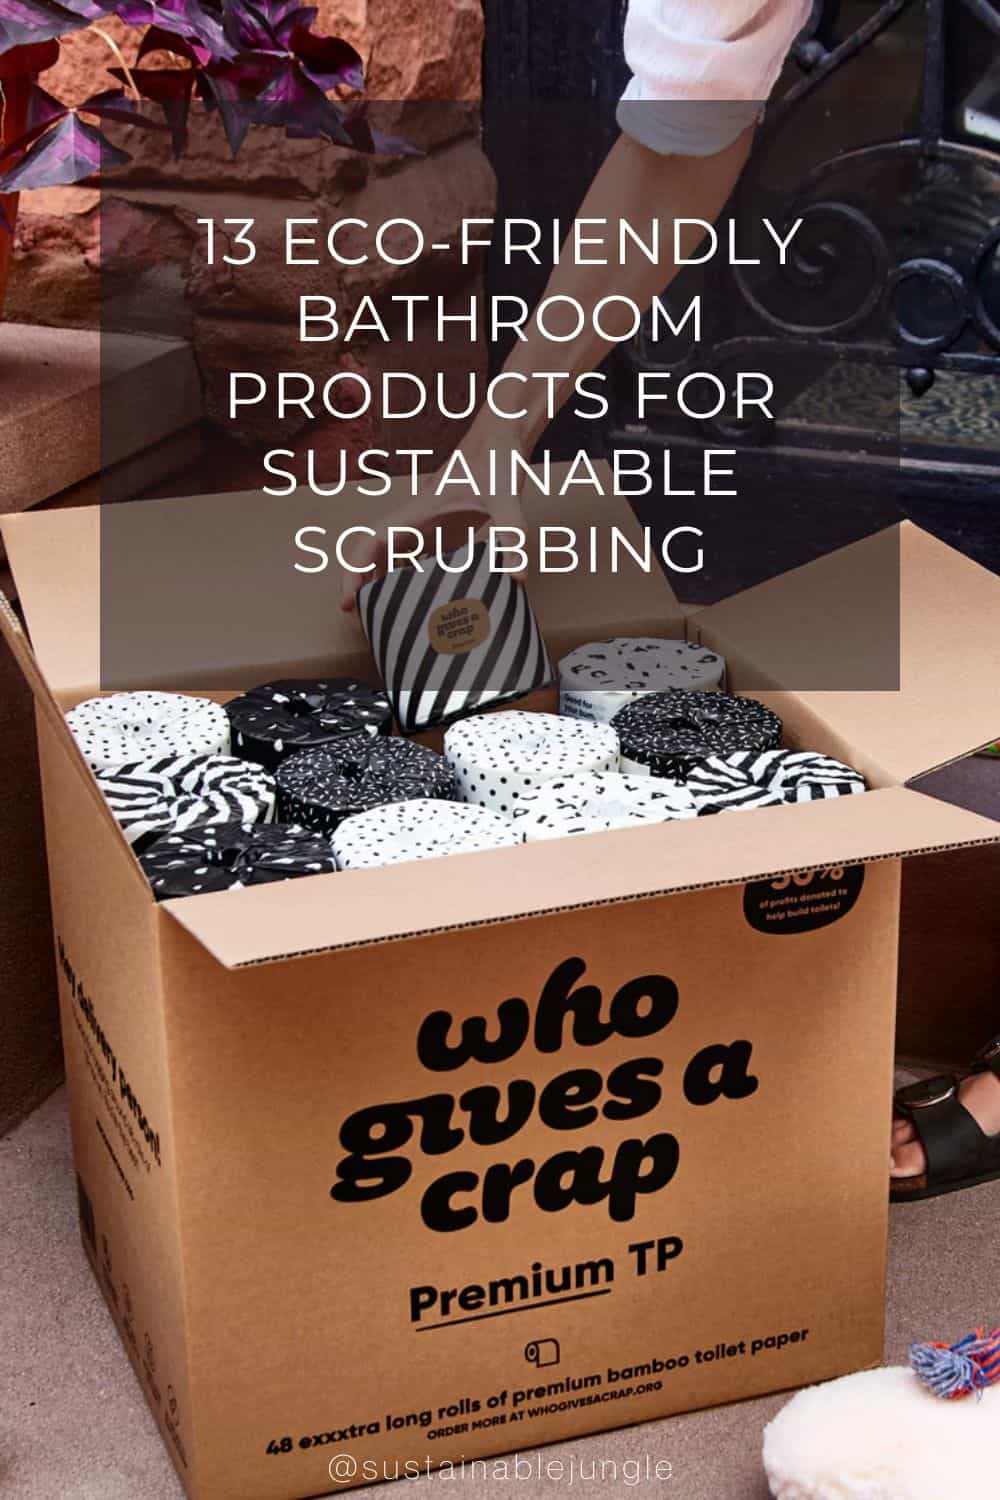 13 Eco-Friendly Bathroom Products For Sustainable Scrubbing Image by Who Gives A Crap #ecofriendlybathroomproducts #ecofriendlyshowerproducts #ecofriendlybathproducts #sustainablebathroomproducts #sustainablebathproducts #sustainablejungle